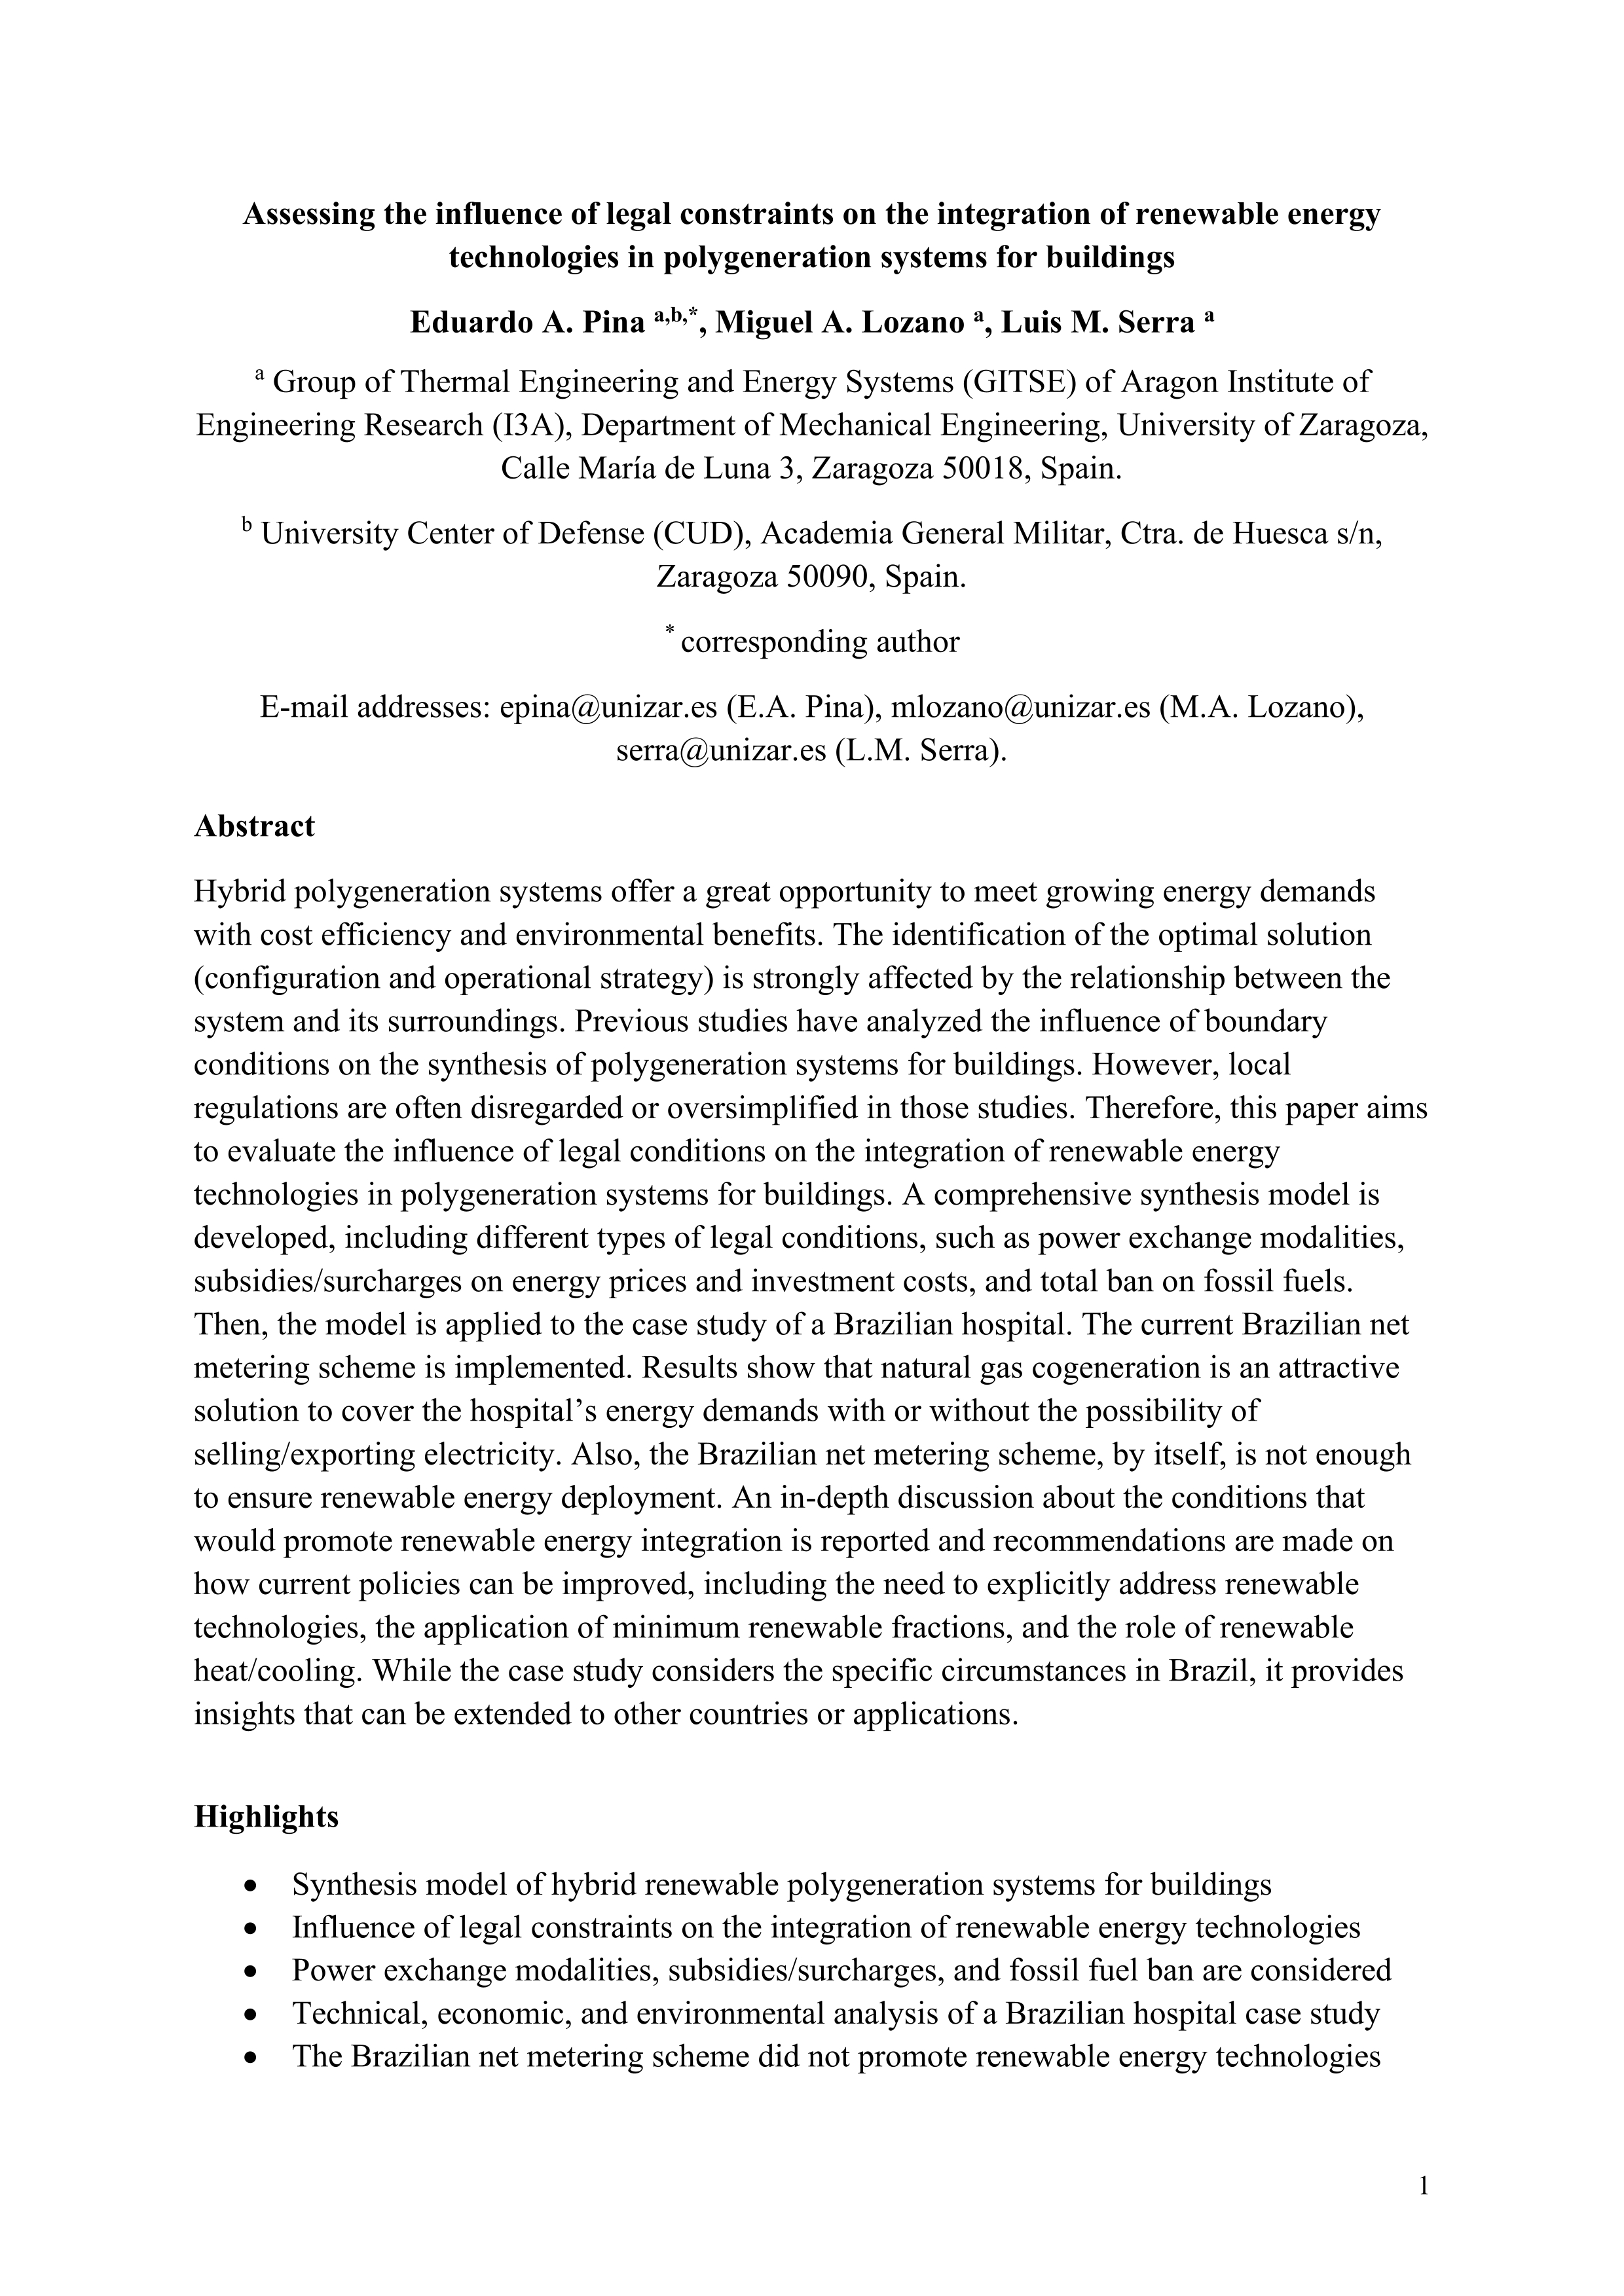 Assessing the influence of legal constraints on the integration of renewable energy technologies in polygeneration systems for buildings